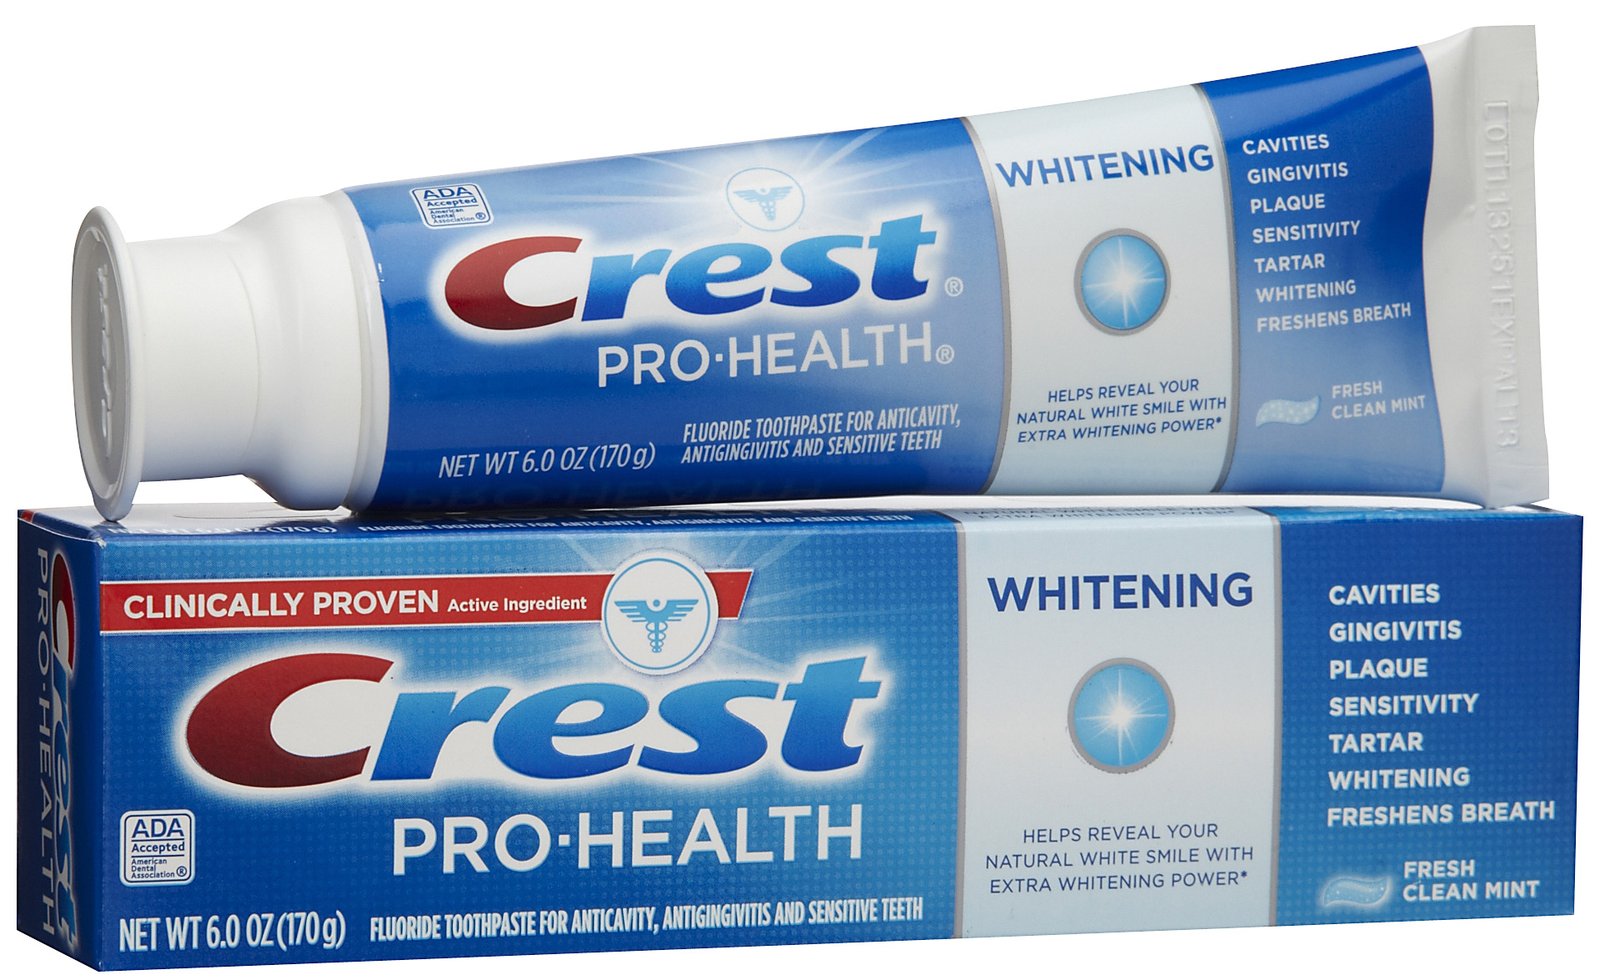 free crest pro-health toothpaste  u0026 scrubbing bubbles products at cvs